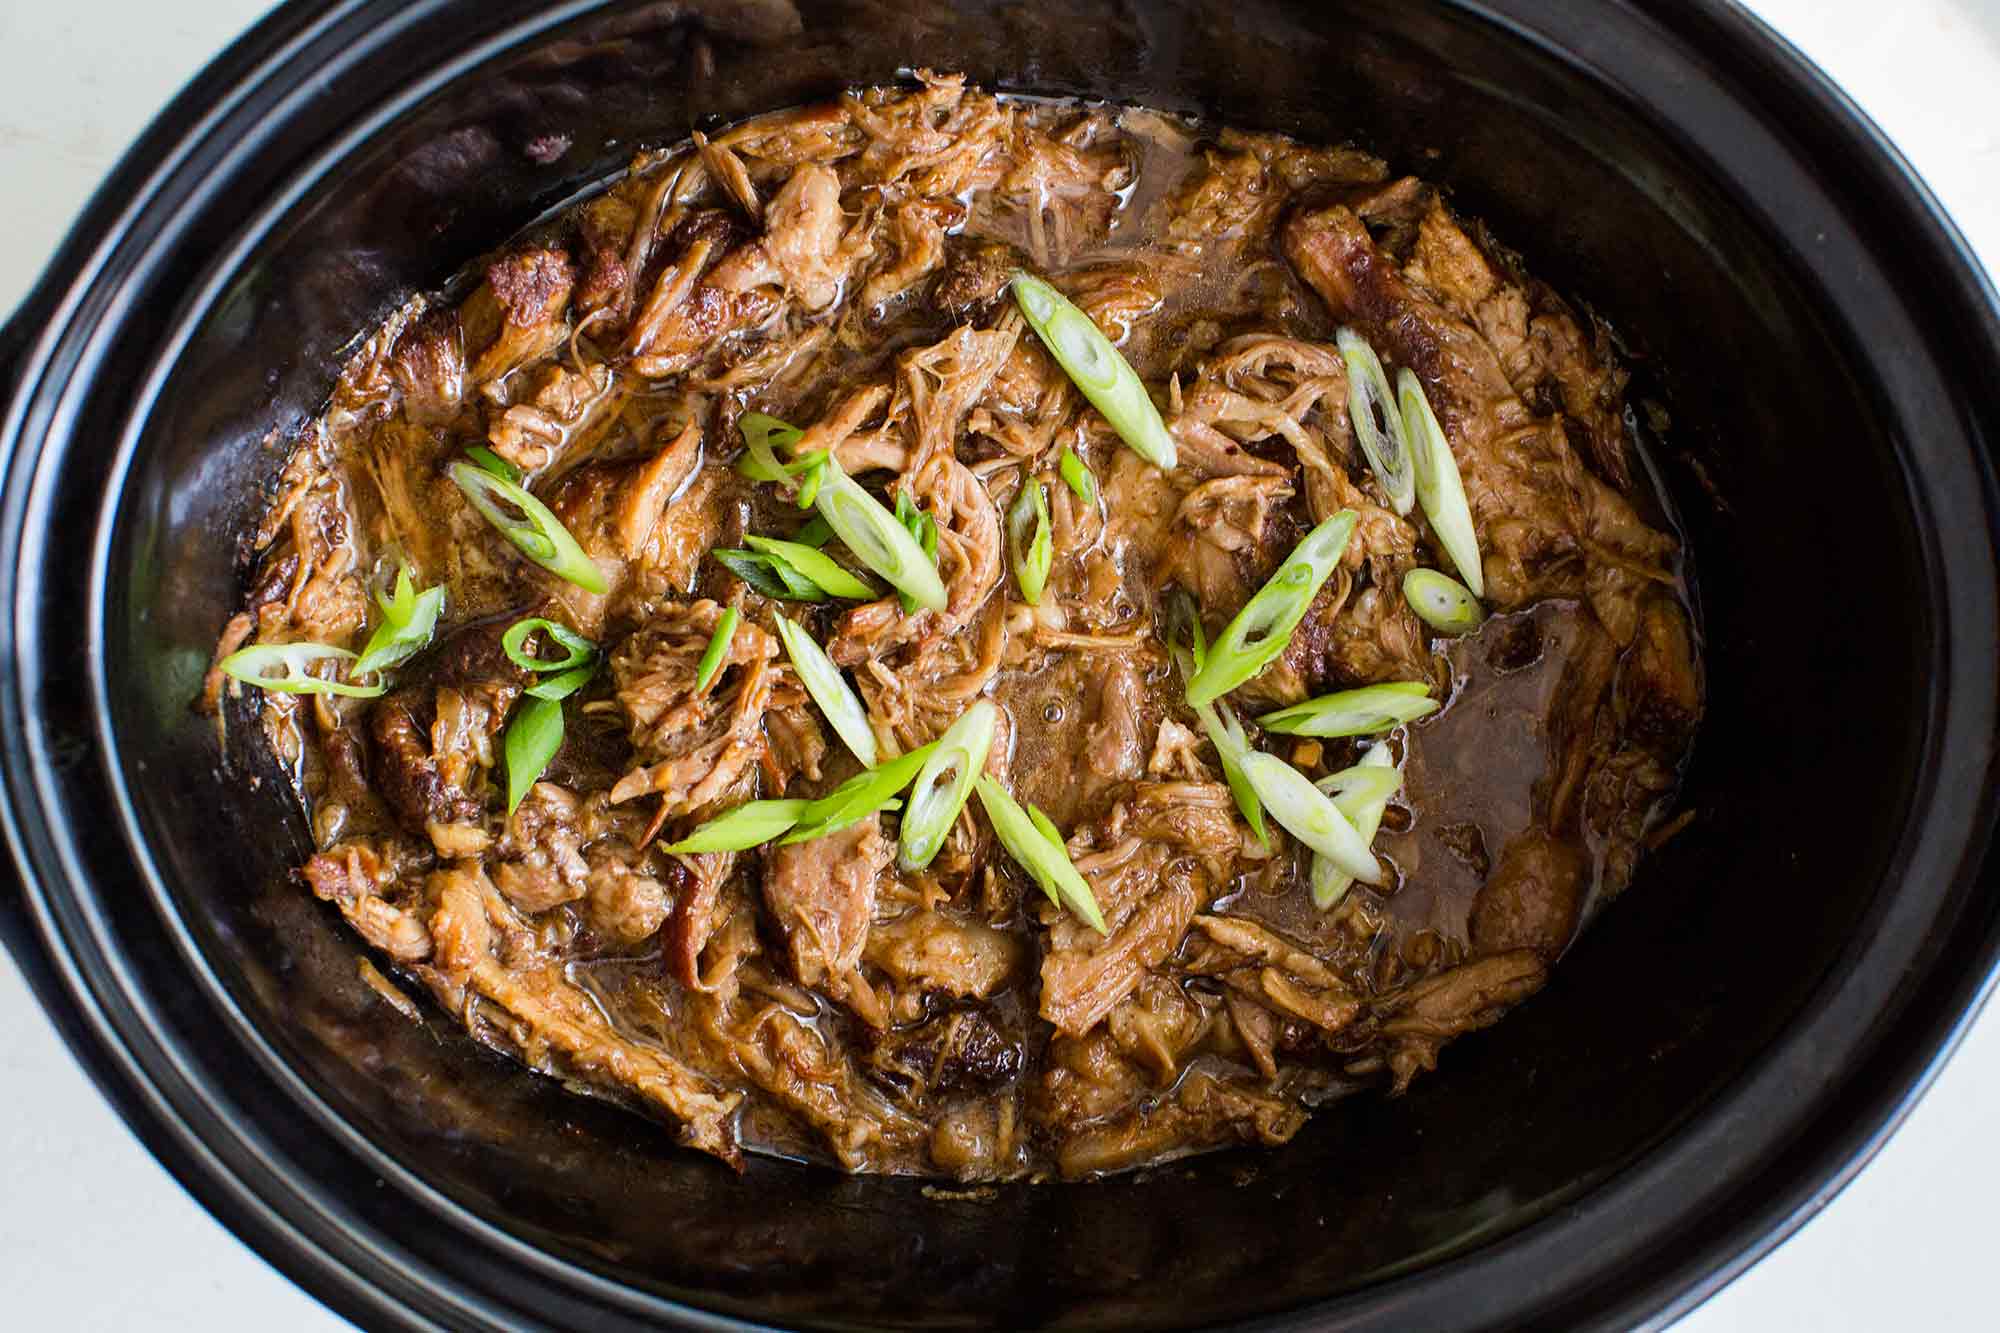 Zee-donk reccomend Slow cooker asian style